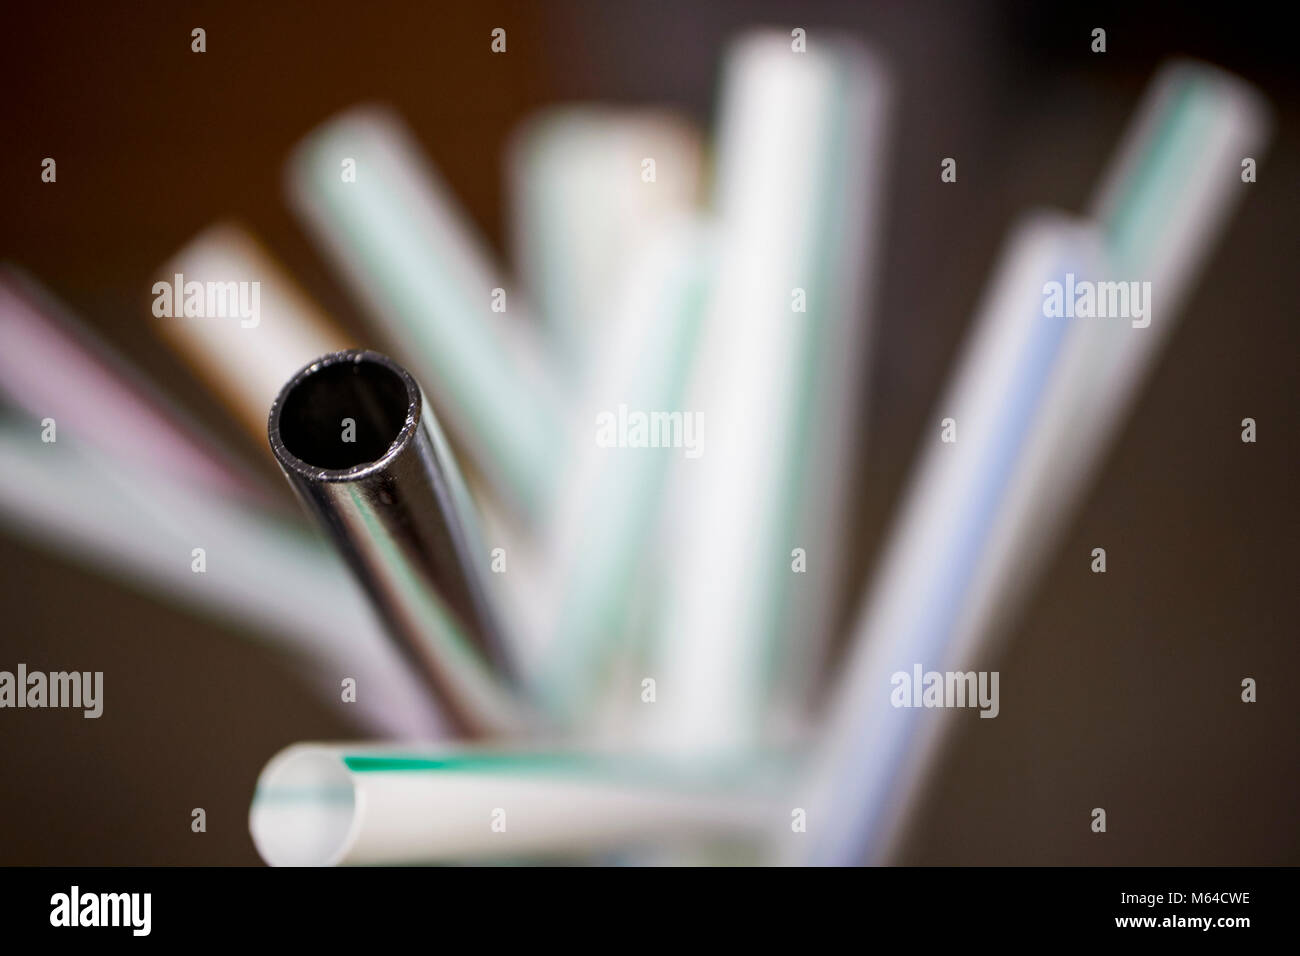 reusable metal straw with plastic straws in the uk Stock Photo